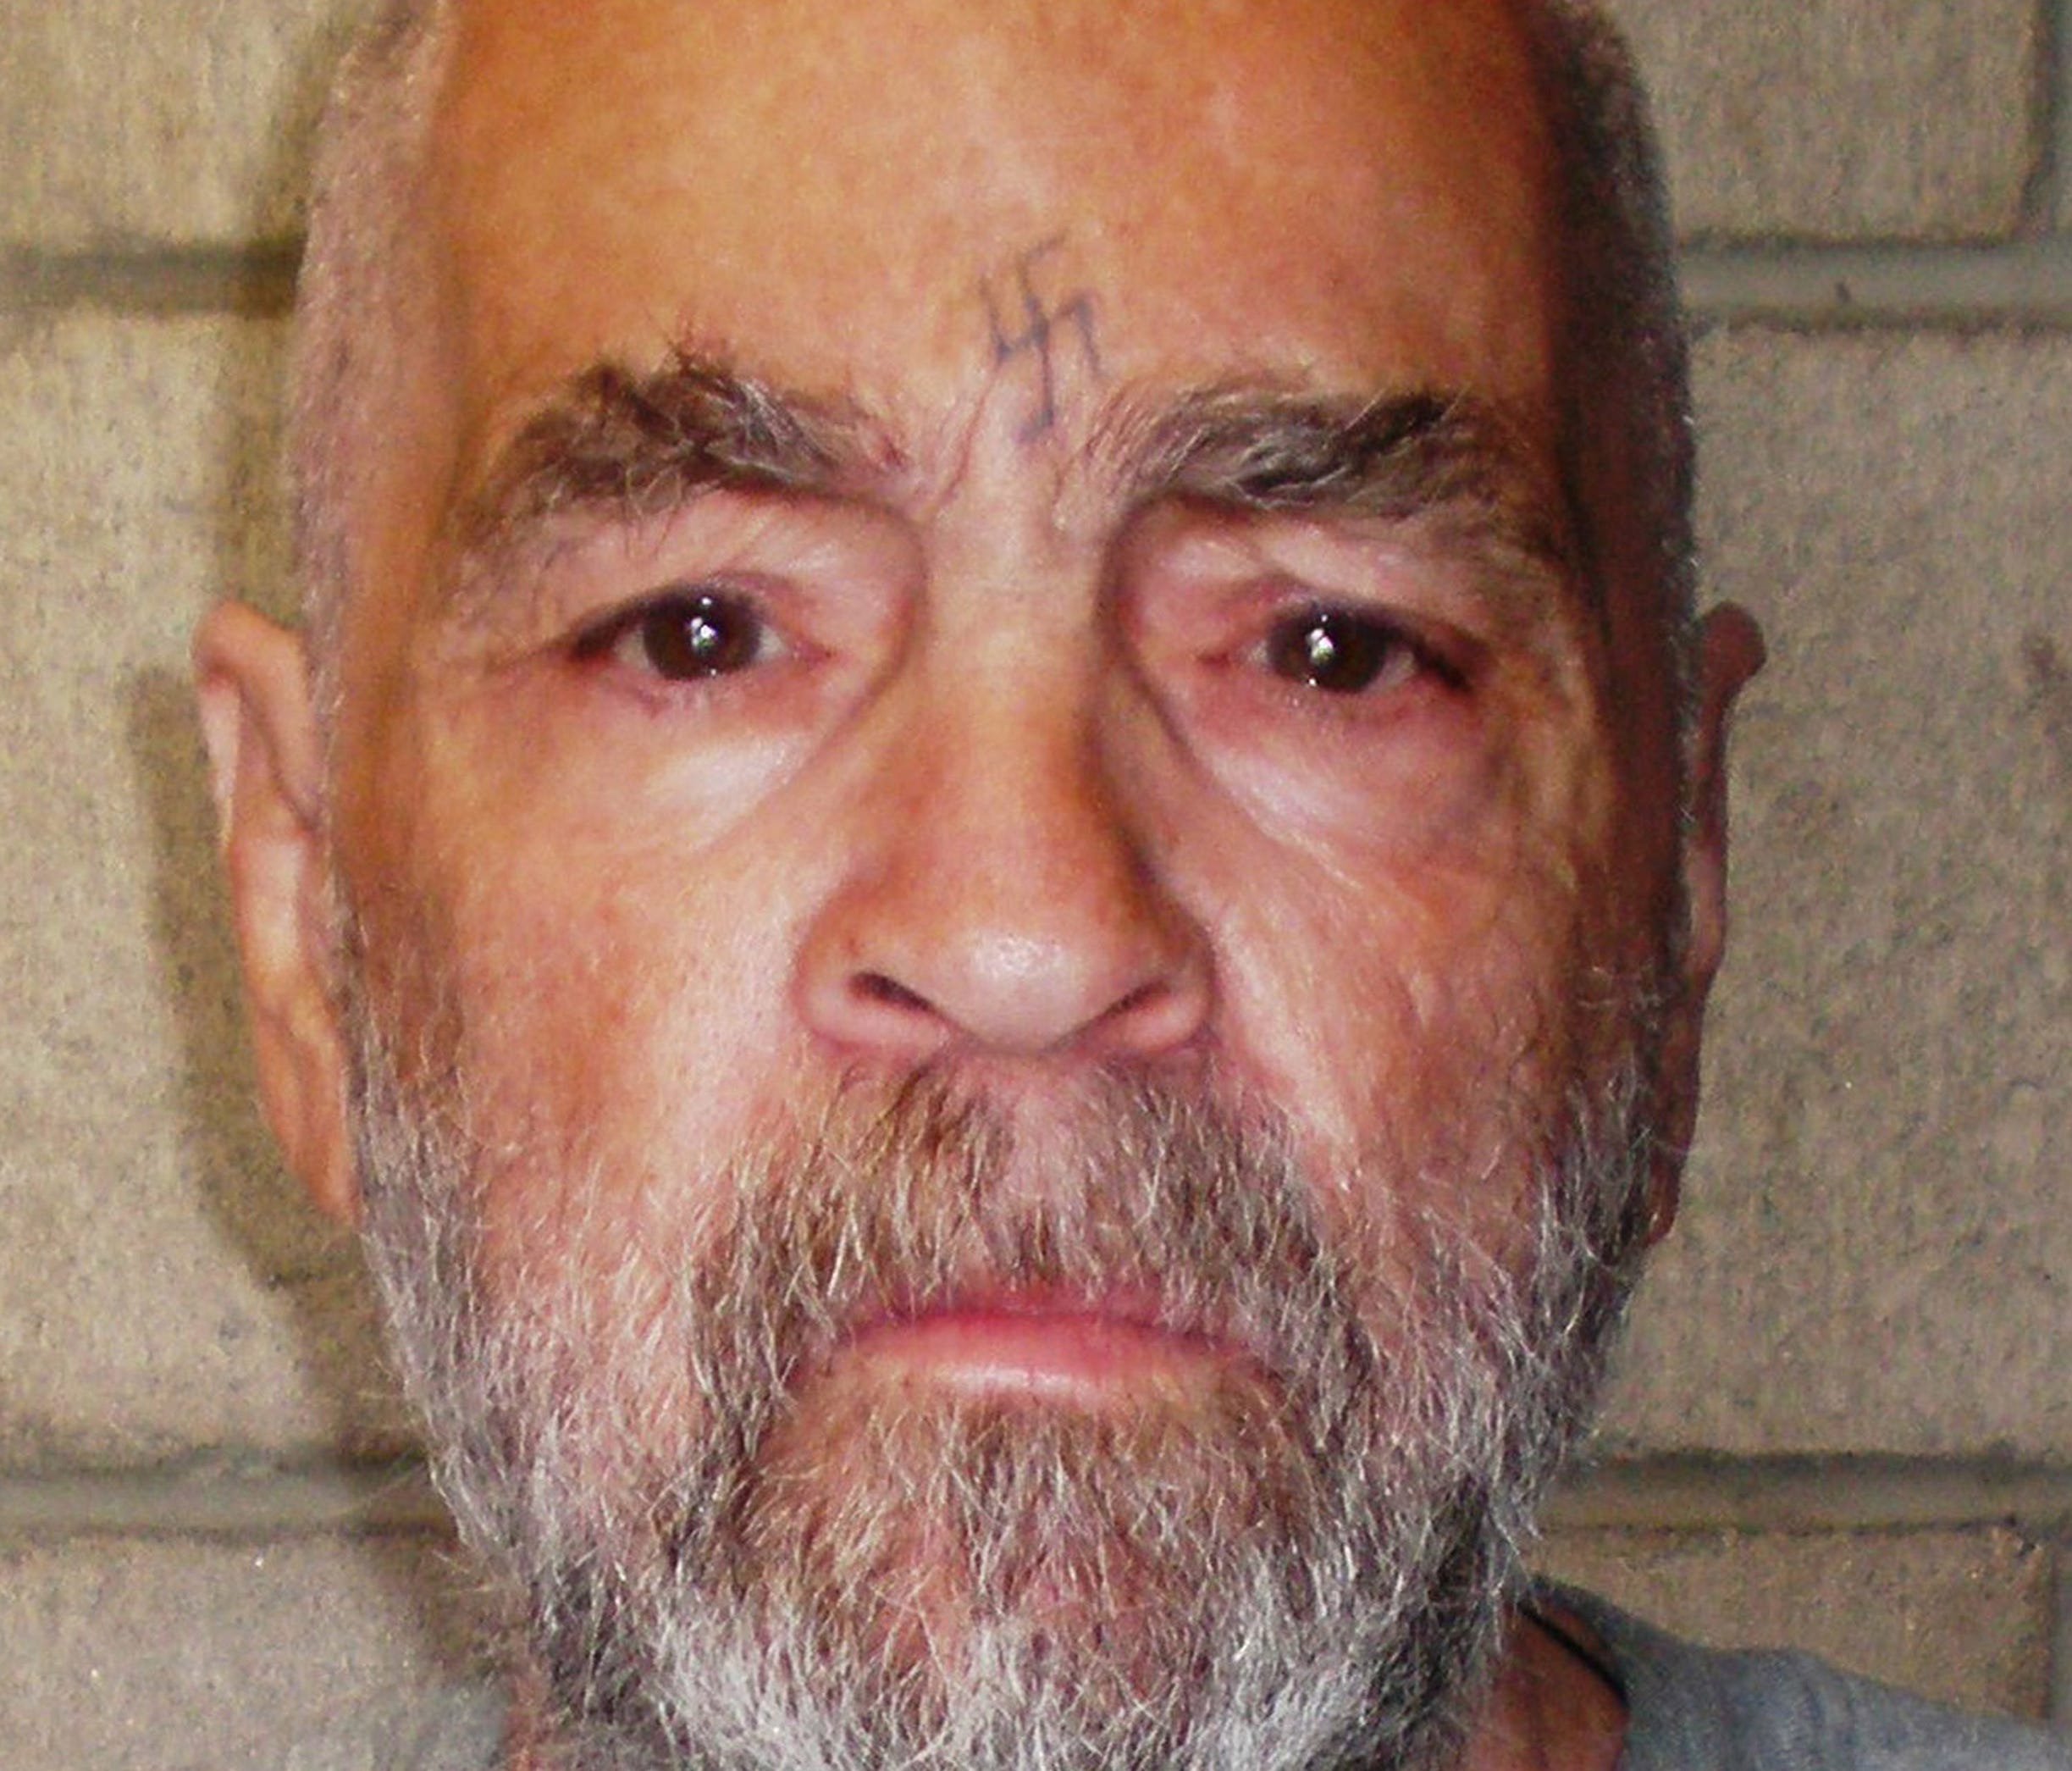 CORCORAN STATE PRISON - MARCH 18:  In this handout photo from the California Department of Corrections and Rehabilitation, Charles Manson, 74, poses for a photo on March 18, 2009 at Corcoran State Prison, California.